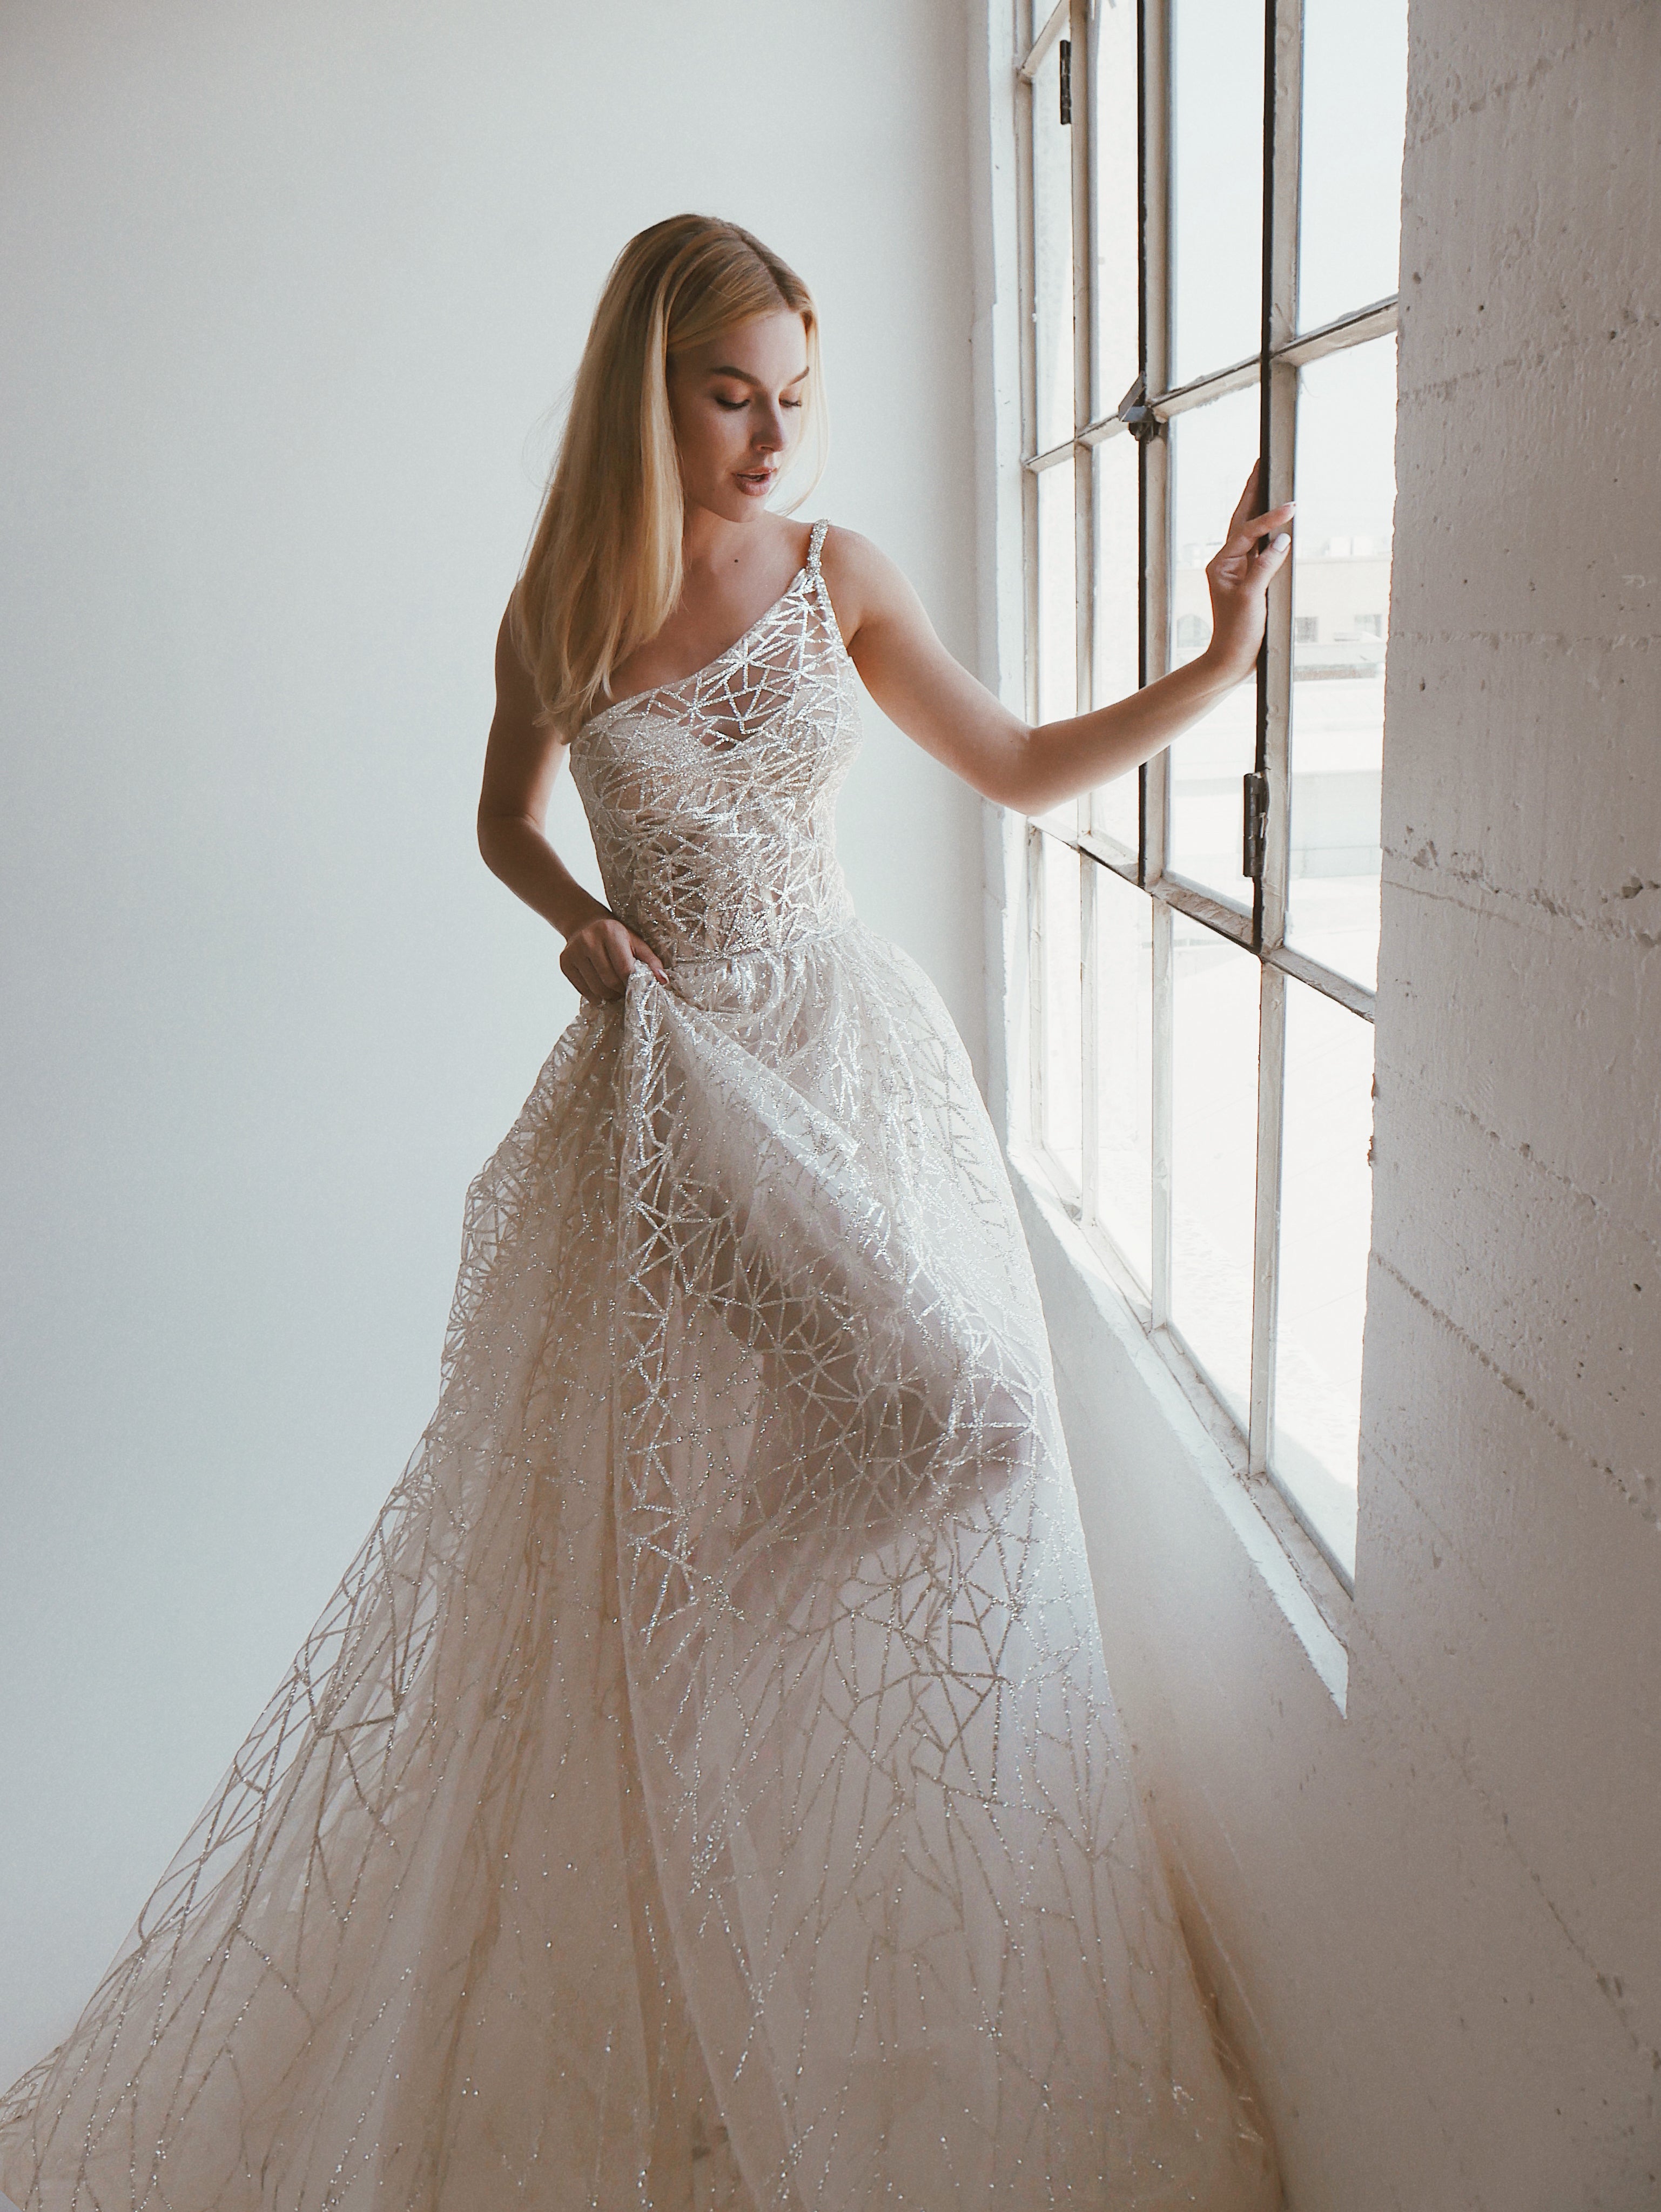 A model wears the Prima gown by Lauren Elaine Bridal featuring one shoulder corset with sparkle